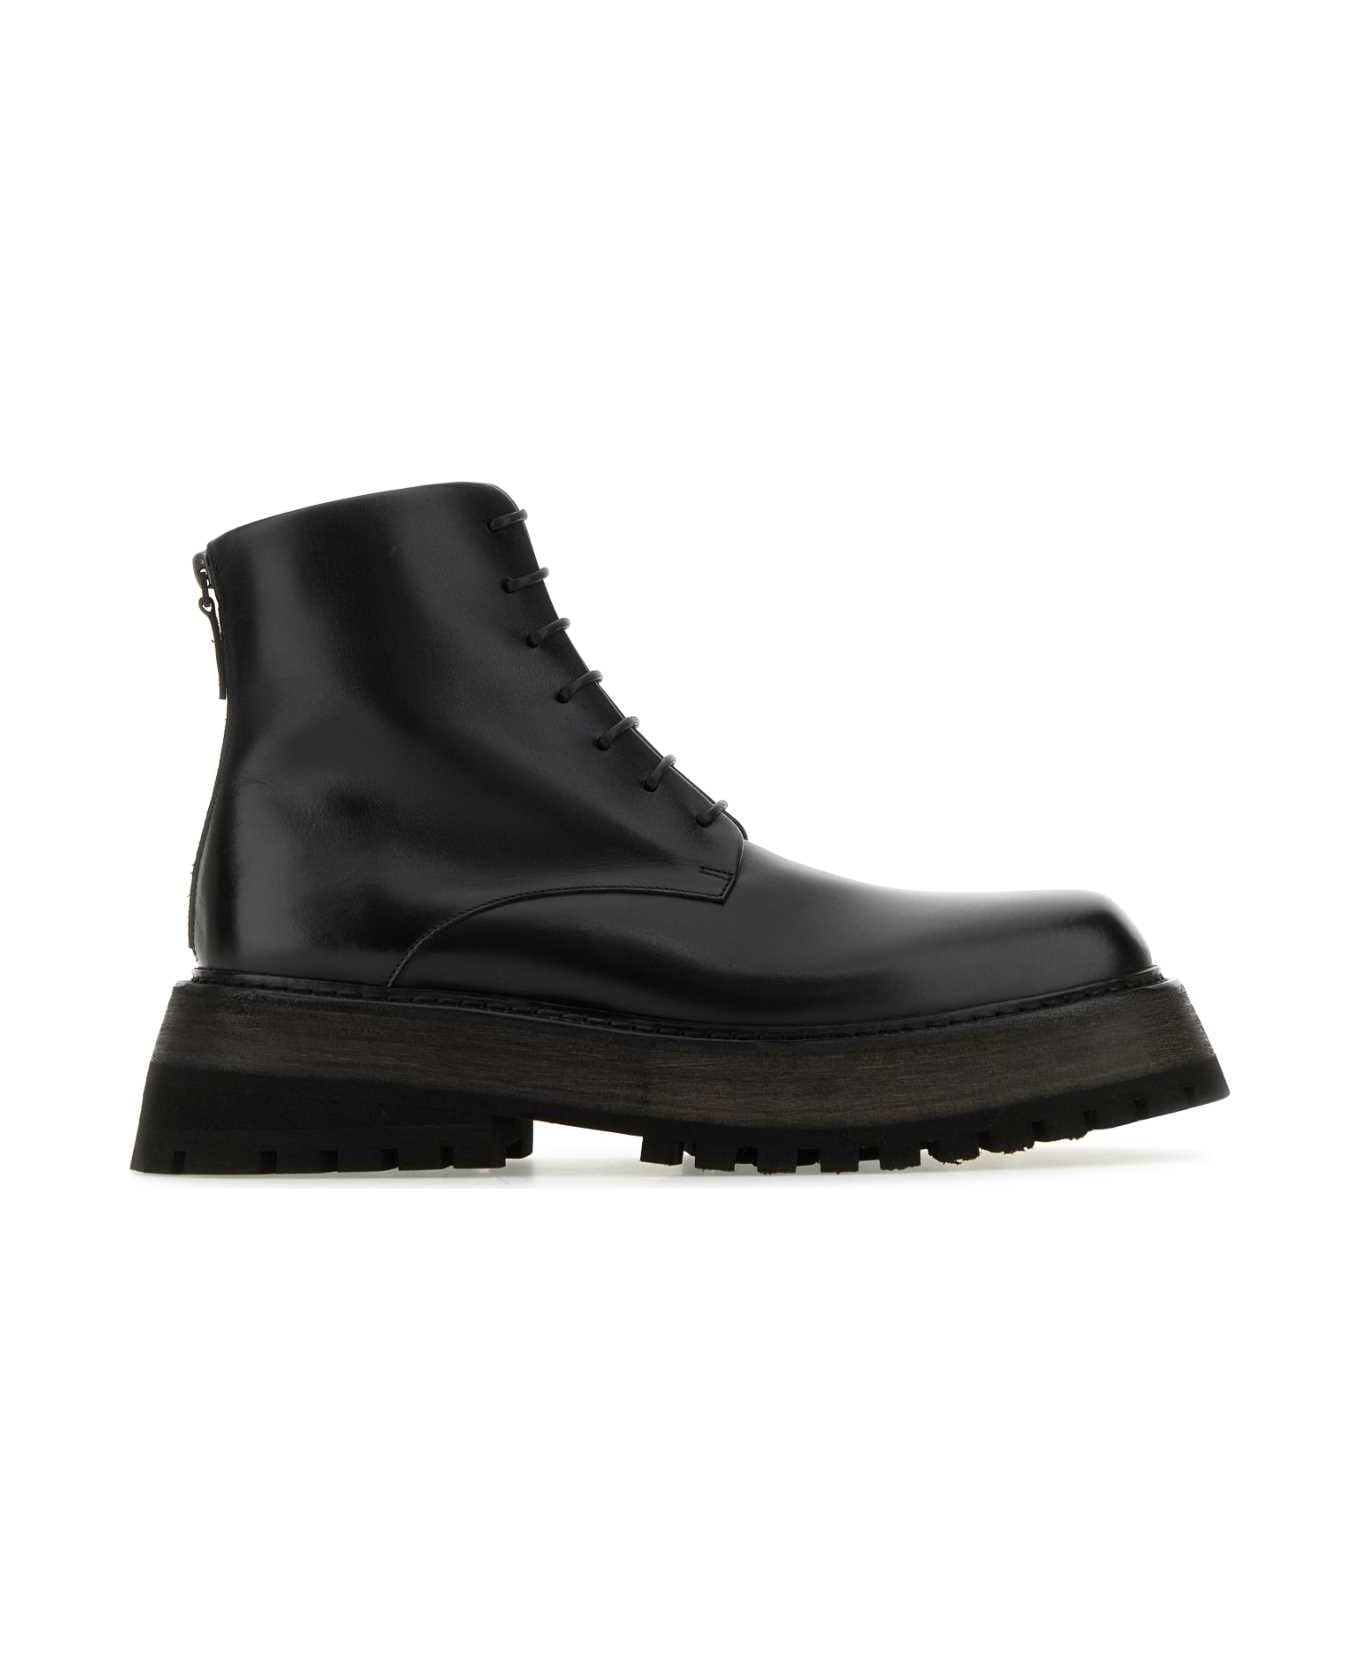 Marsell Black Leather Ankle Boots - BLACK